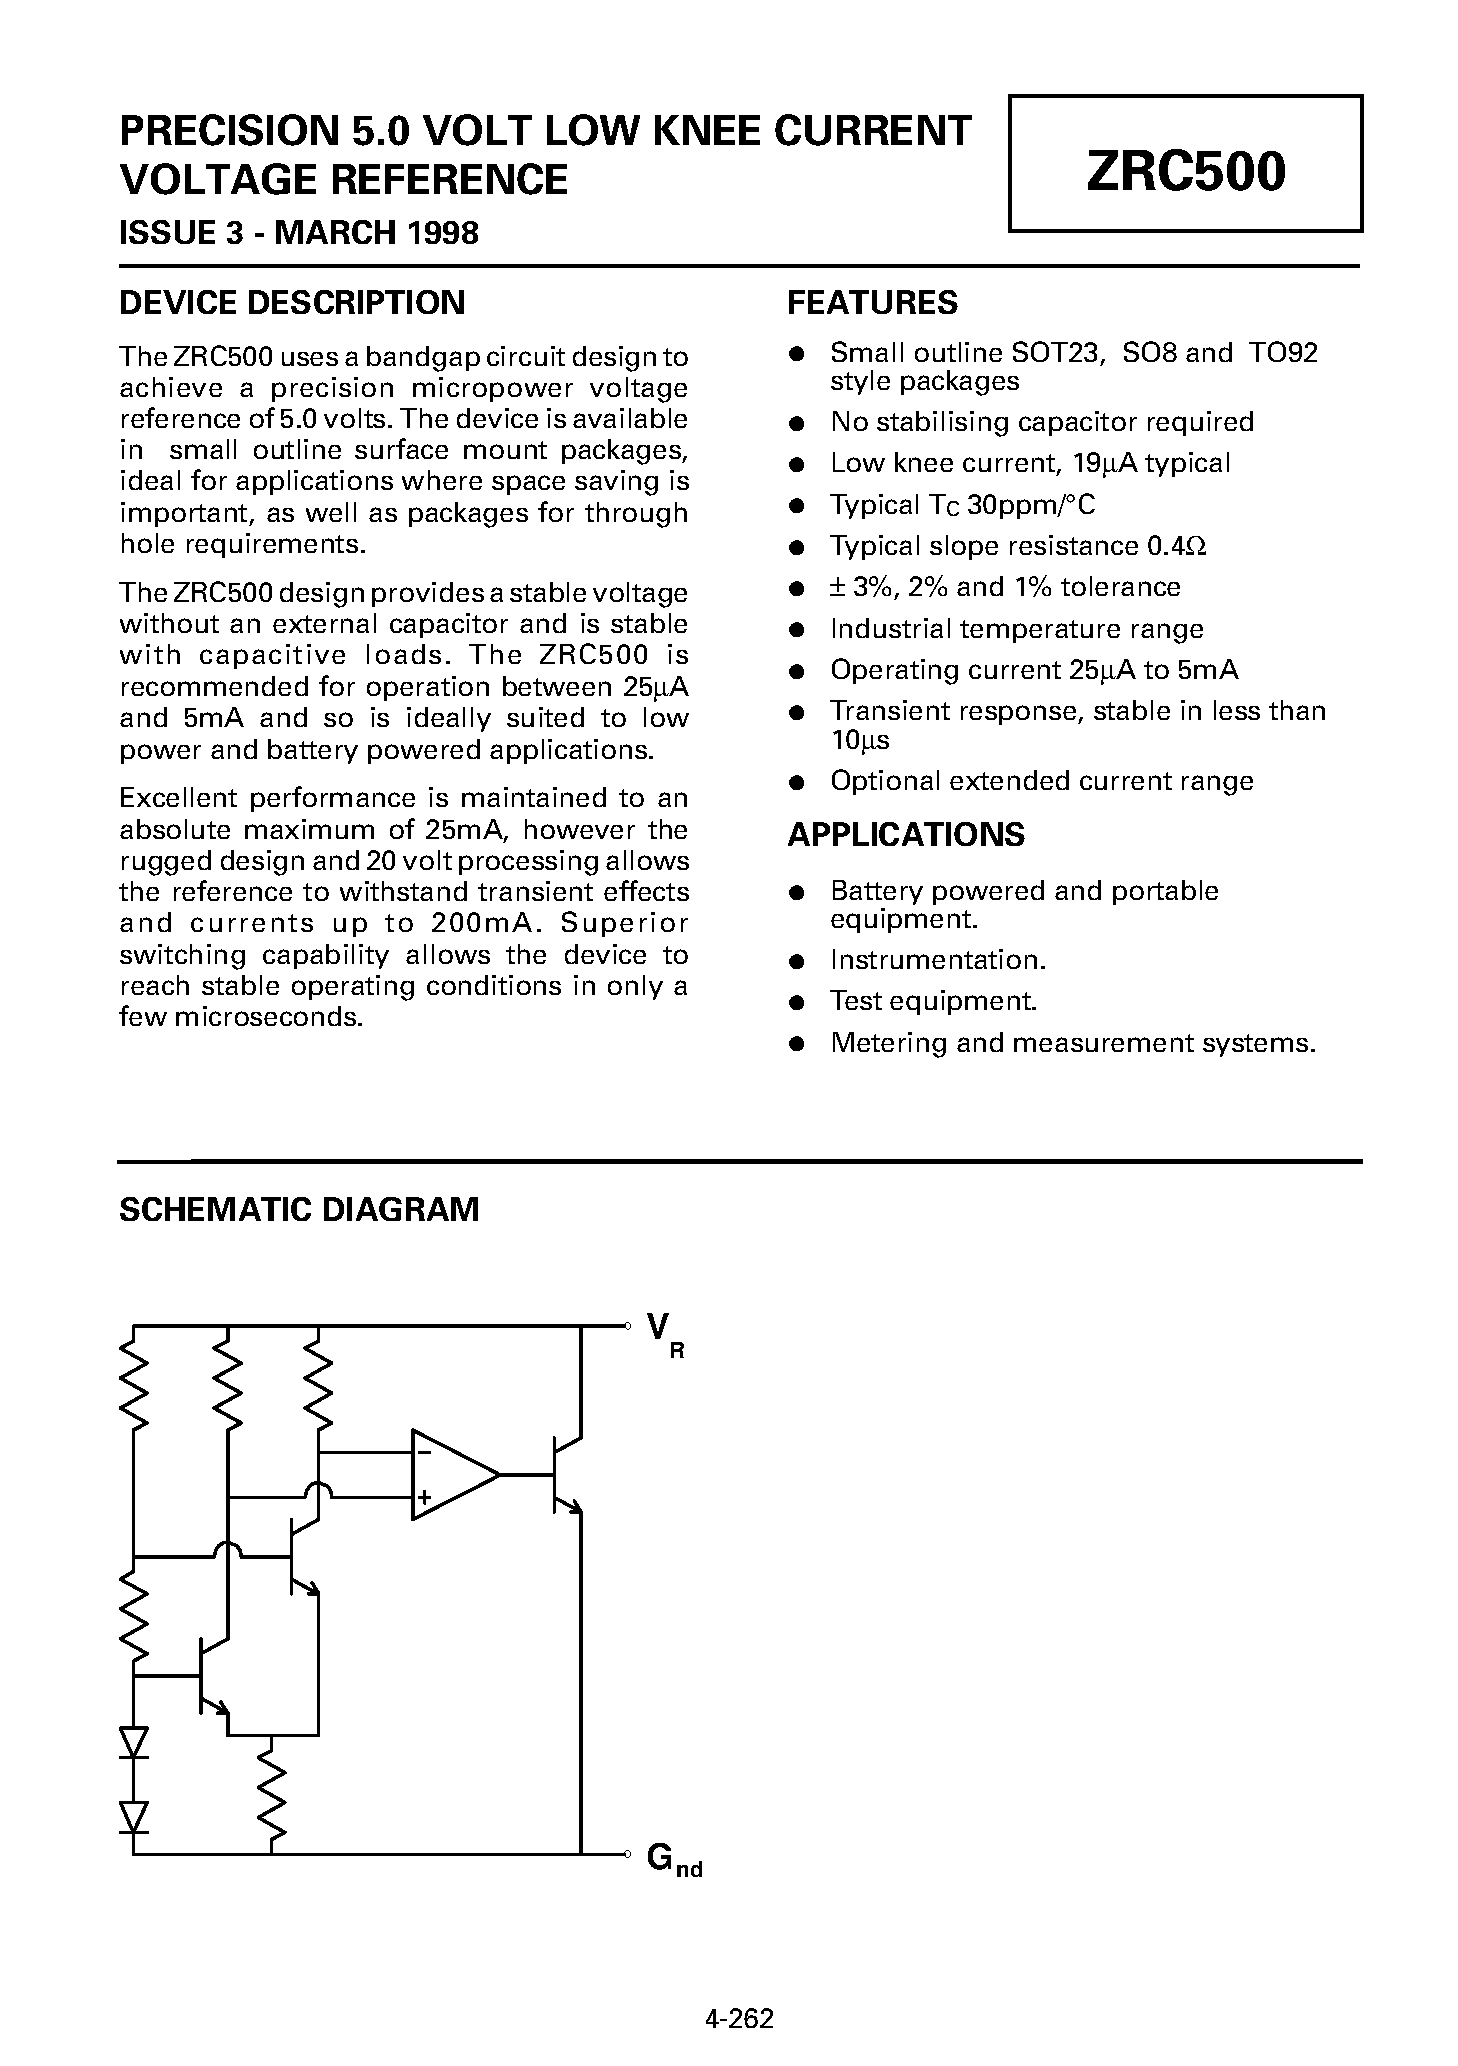 Datasheet ZRC500Y02 - PRECISION 5.0 VOLT LOW KNEE CURRENT VOLTAGE REFERENCE page 1